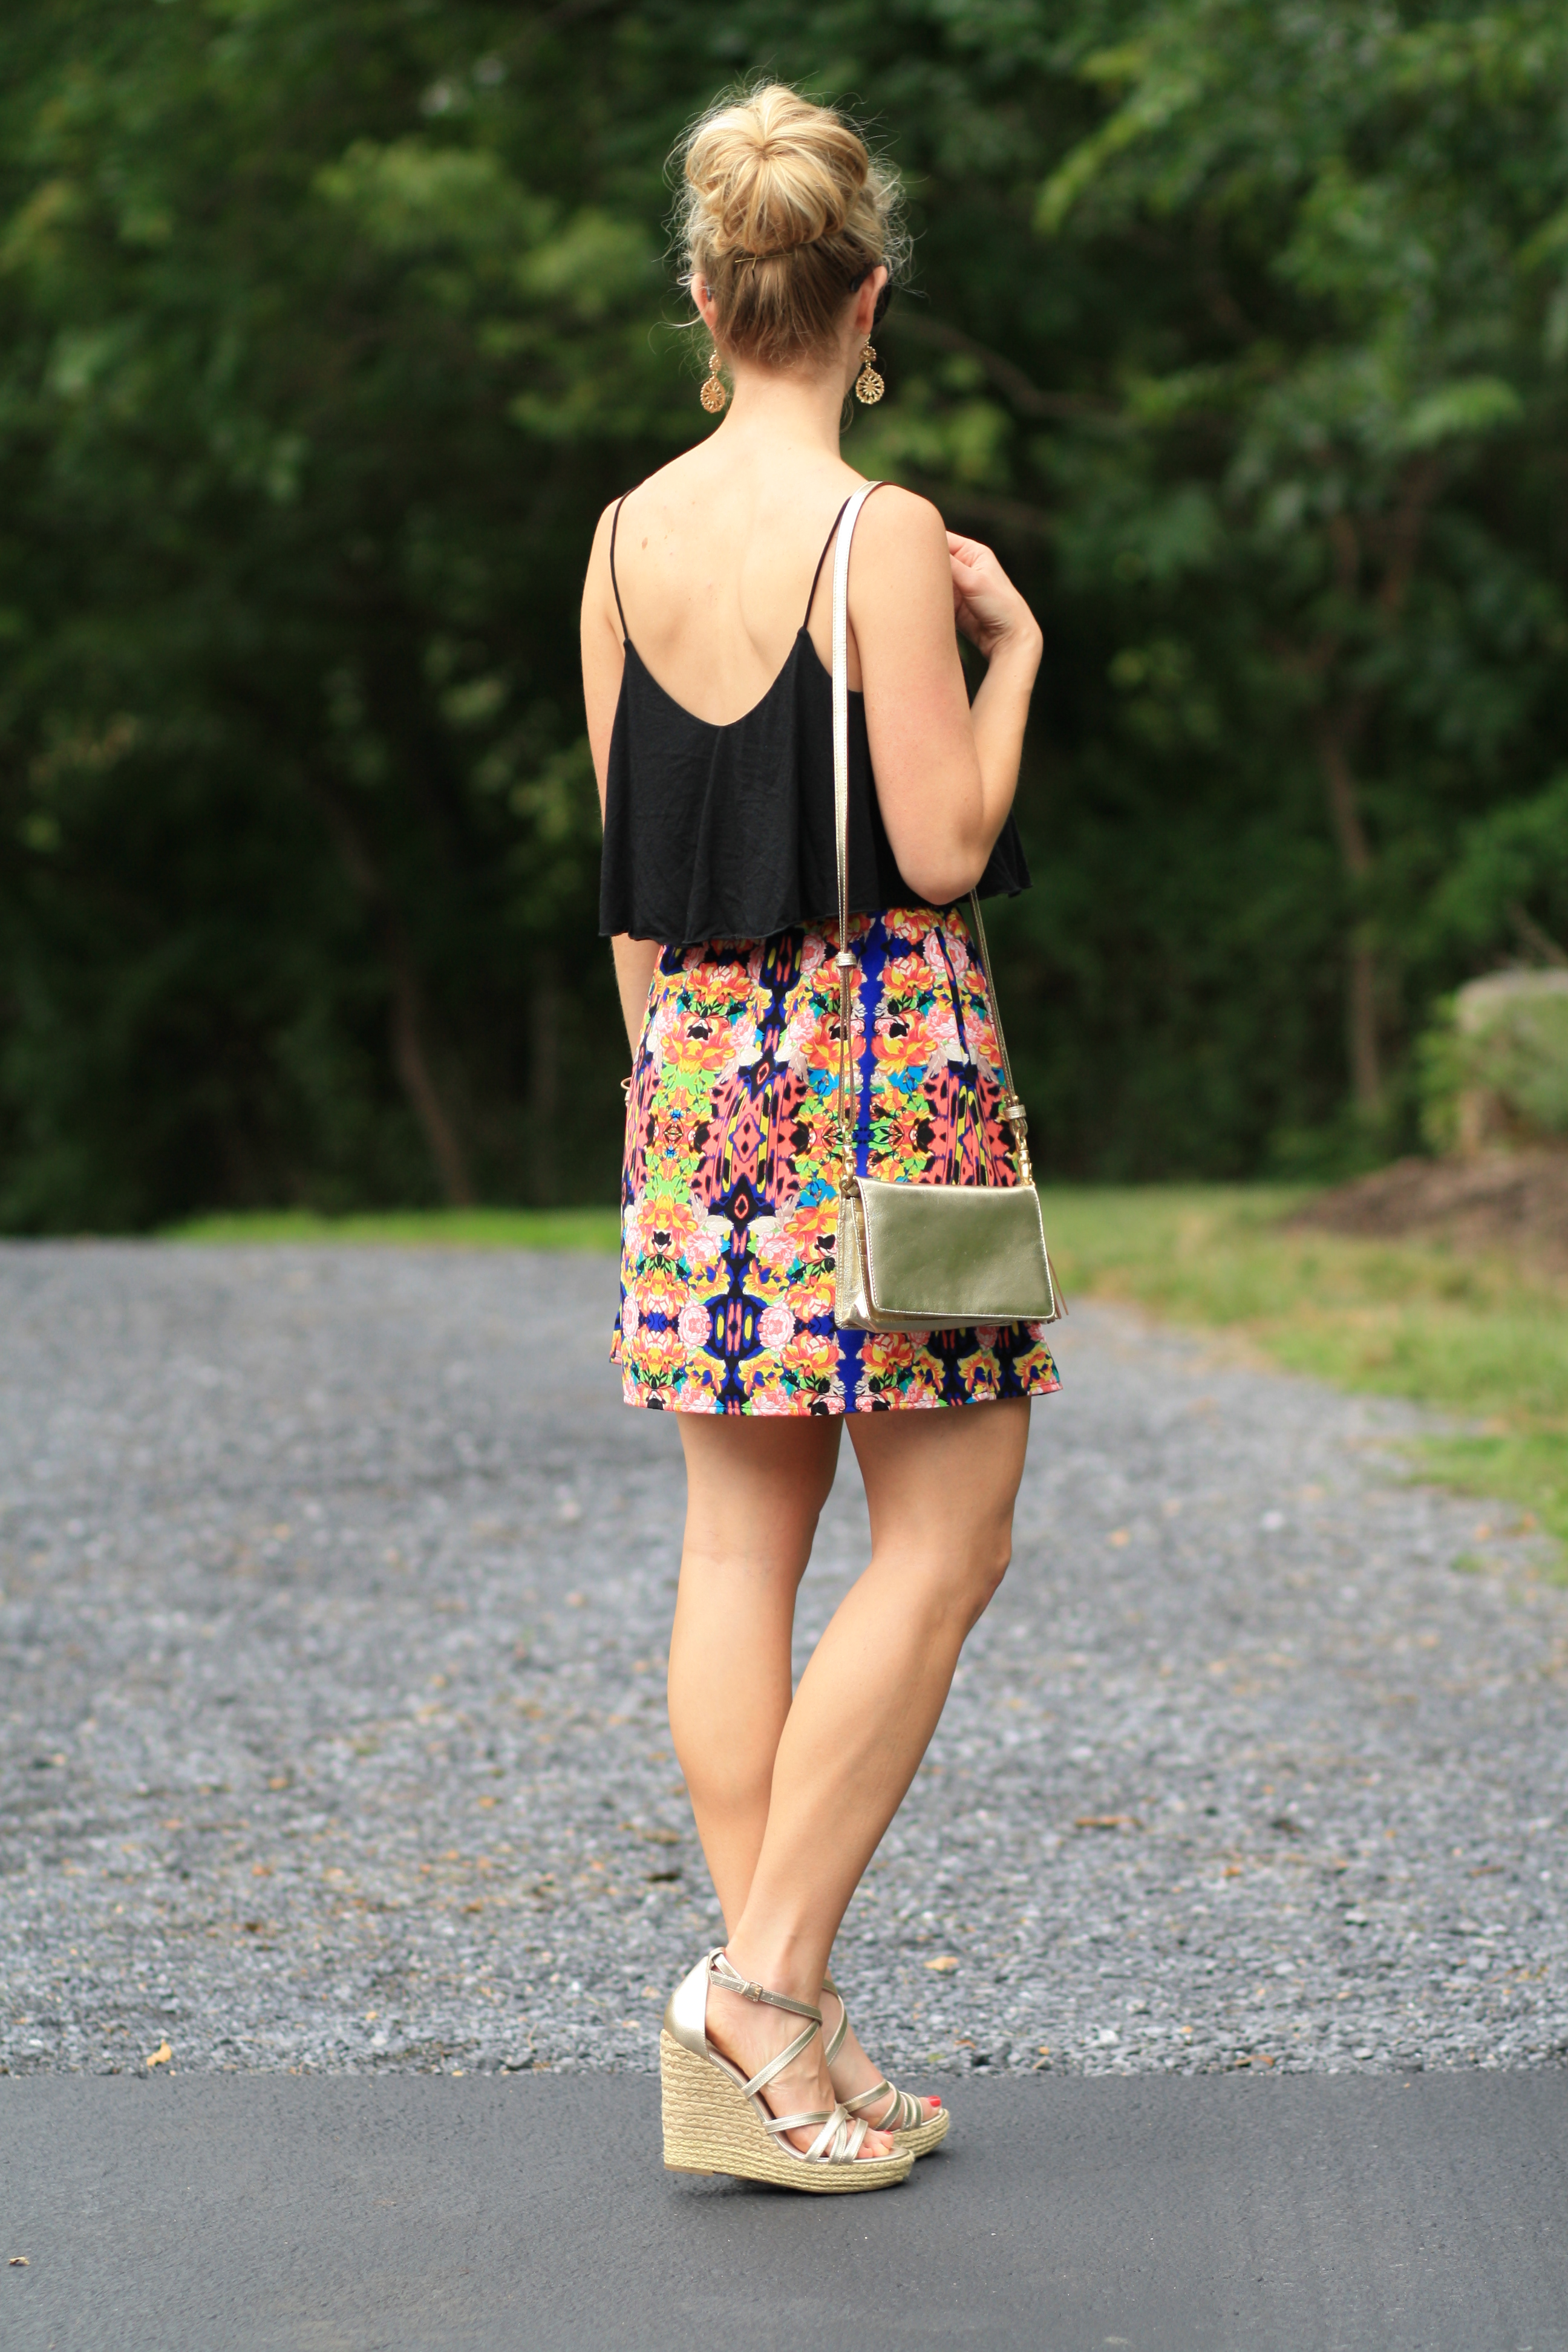 { Island-Inspired: Black cropped cami, Colorful skirt & Gold